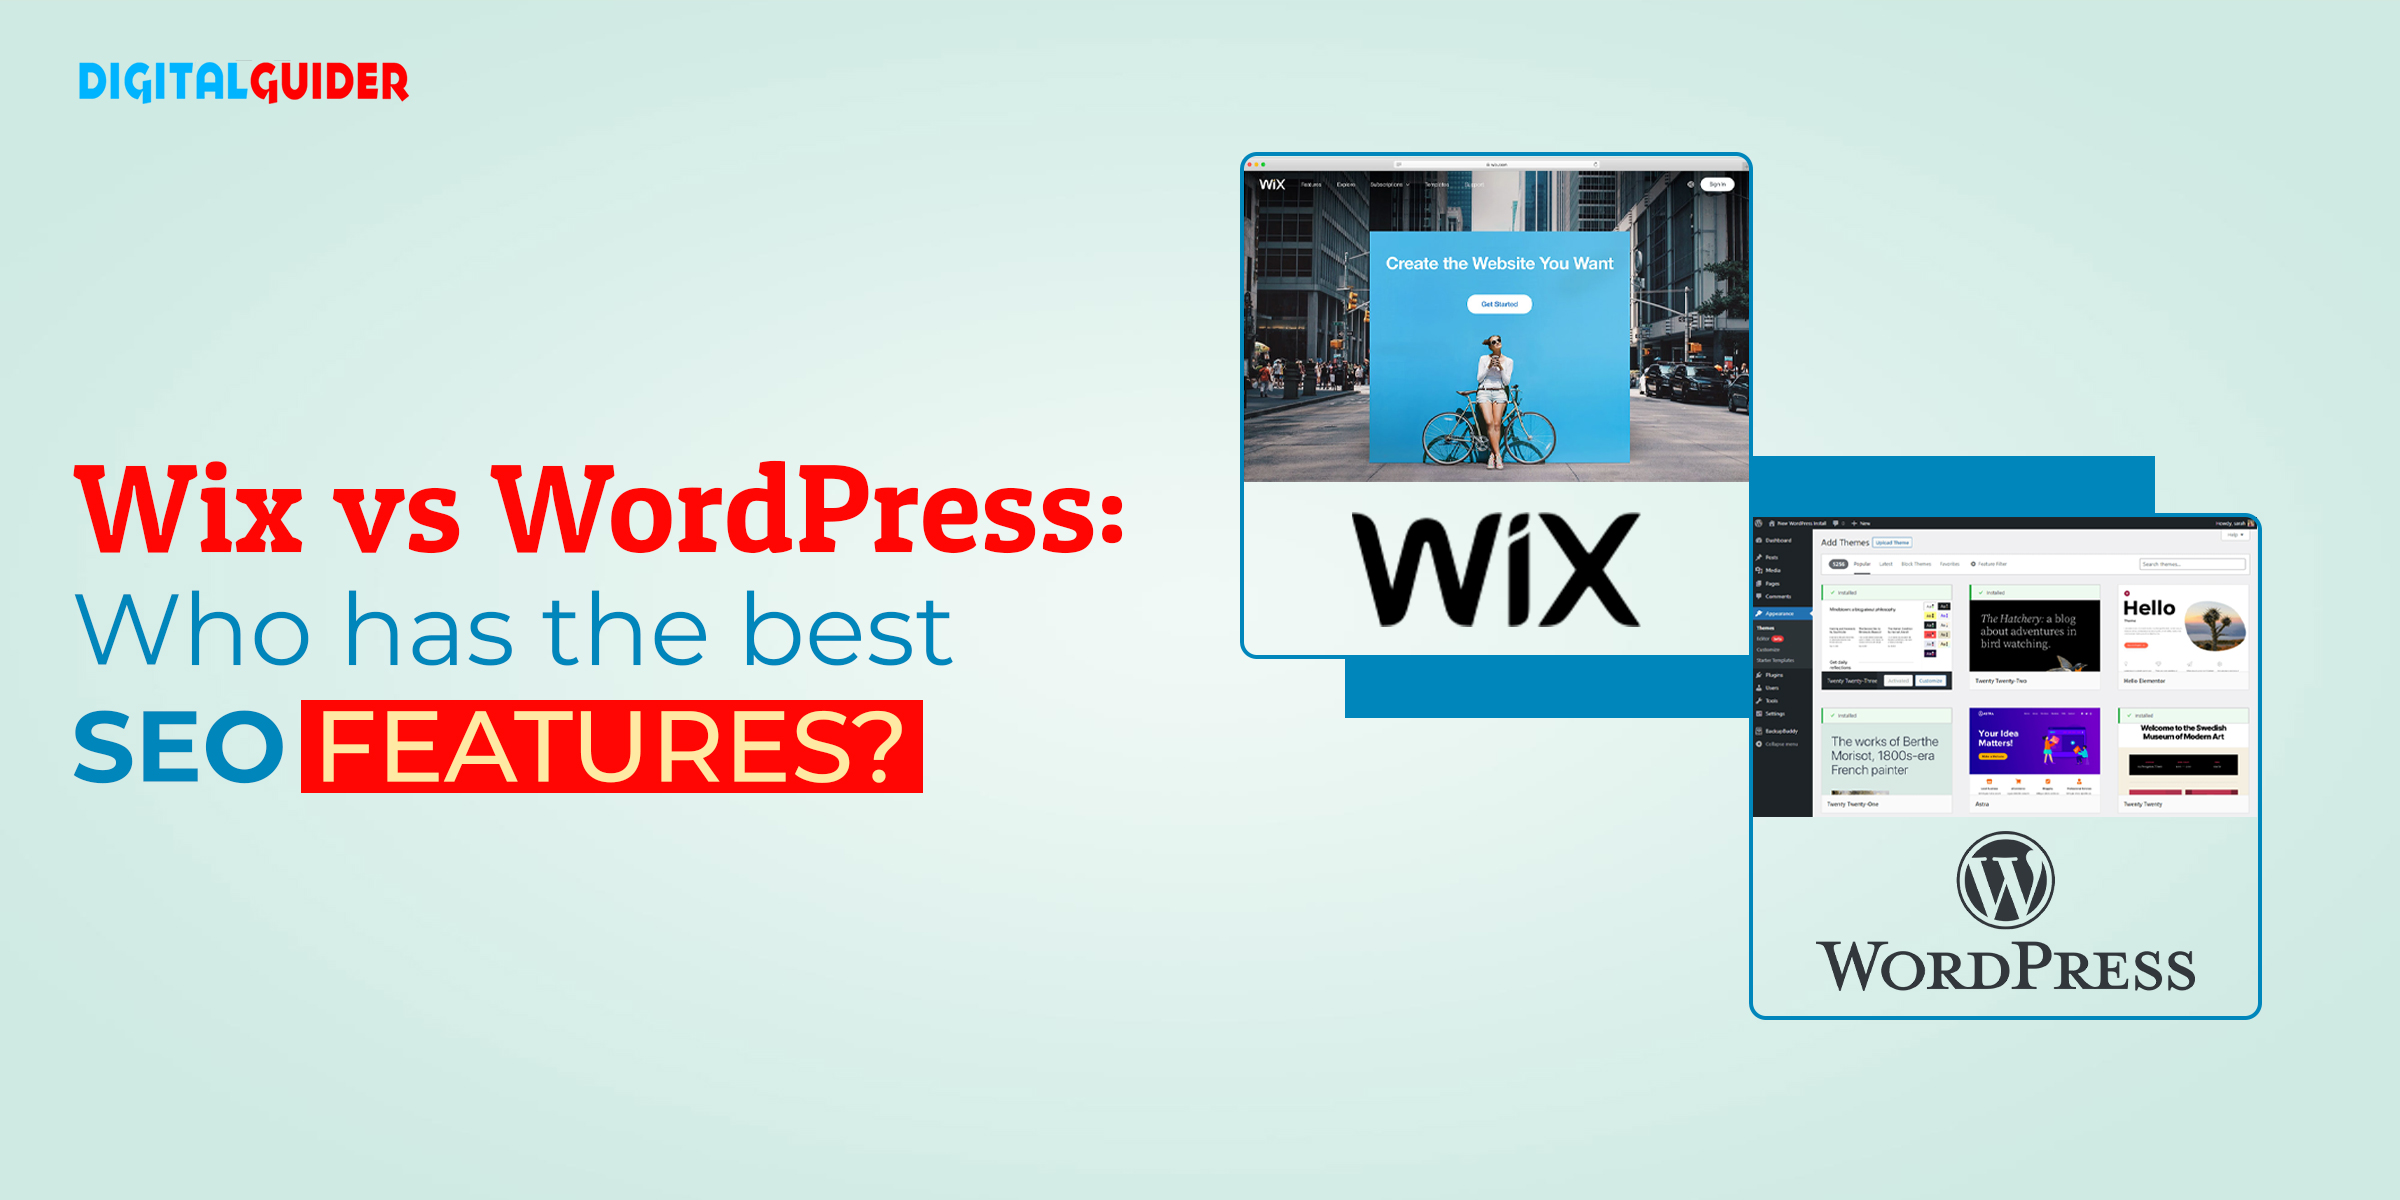 Wix vs WordPress: Who has the best SEO features?